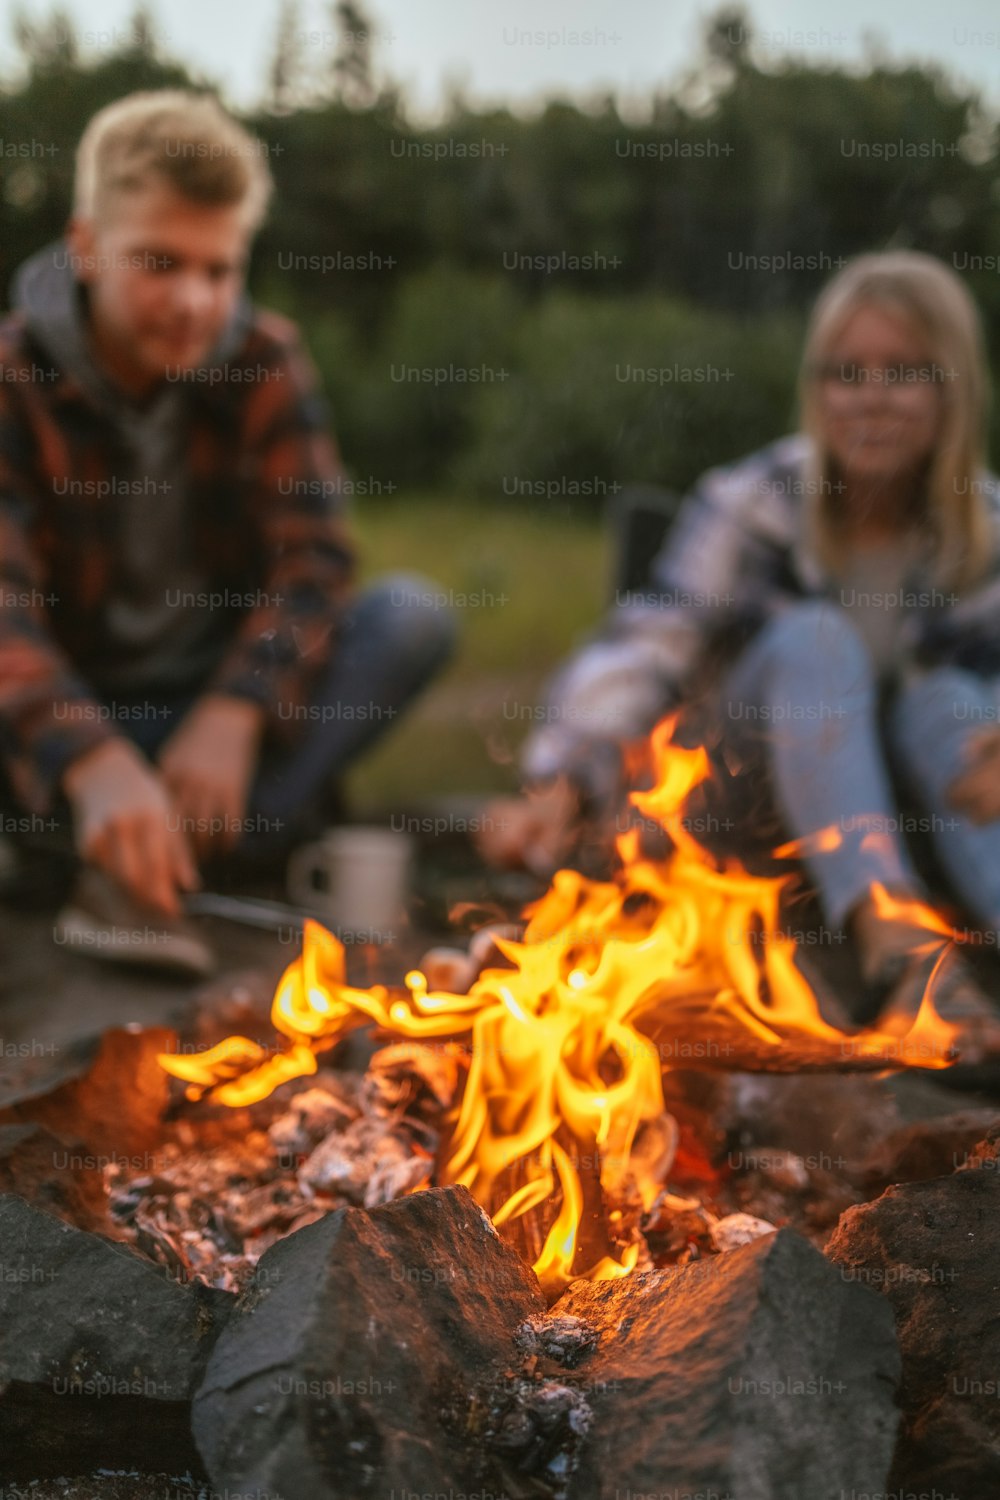 a man and a woman sitting next to a campfire